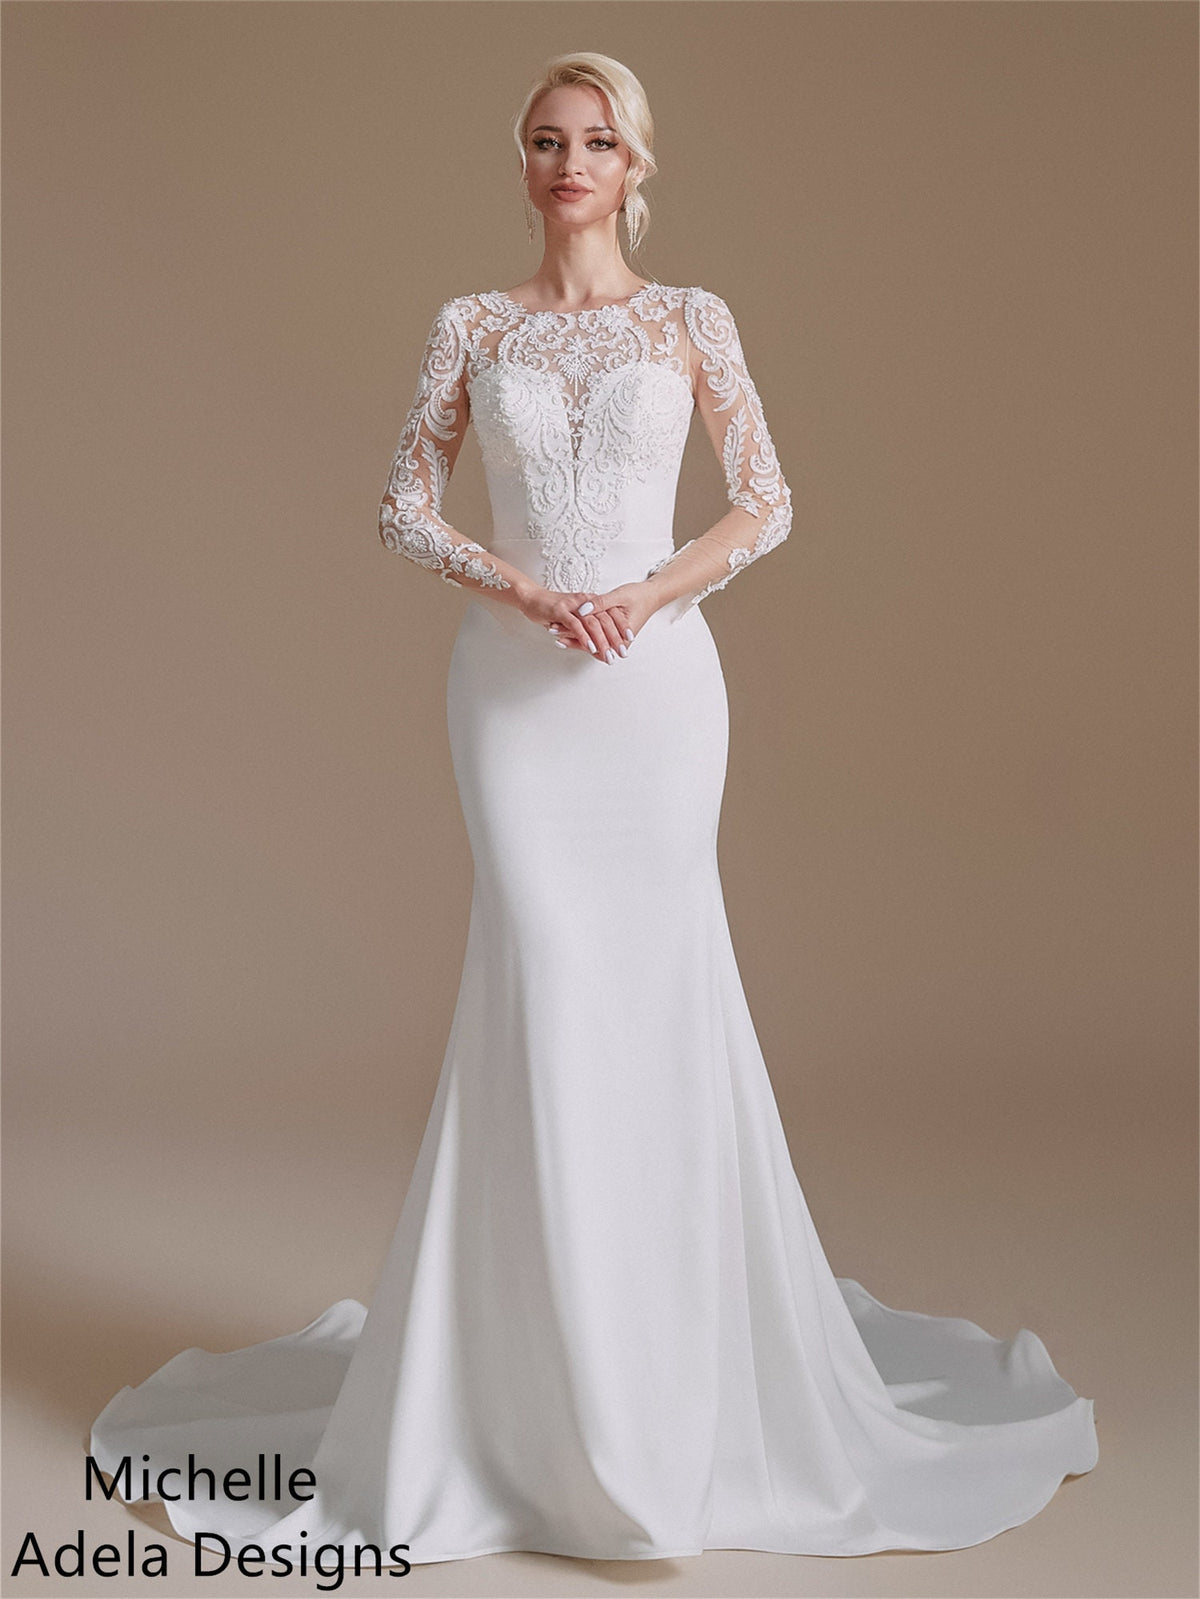 Vintage Style Stretch Crepe Beaded Lace Mermaid Classic Wedding Dress With Long Sleeves Bridal Gown Lace Bodice Fit and Flare with Train